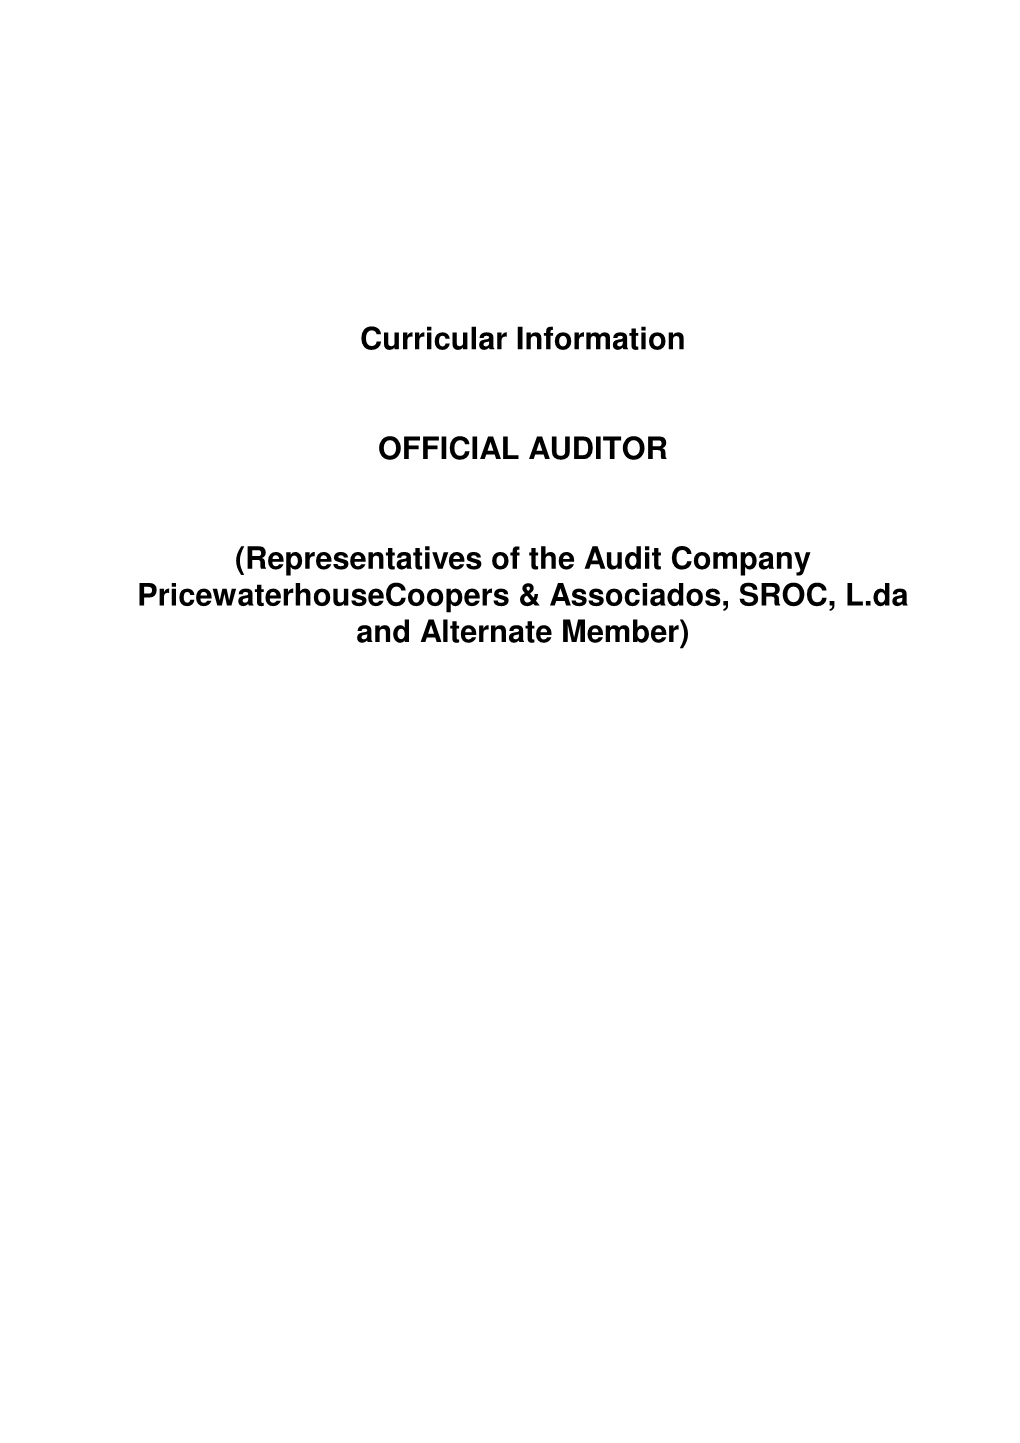 Curricular Information OFFICIAL AUDITOR (Representatives of the Audit Company Pricewaterhousecoopers & Associados, SROC